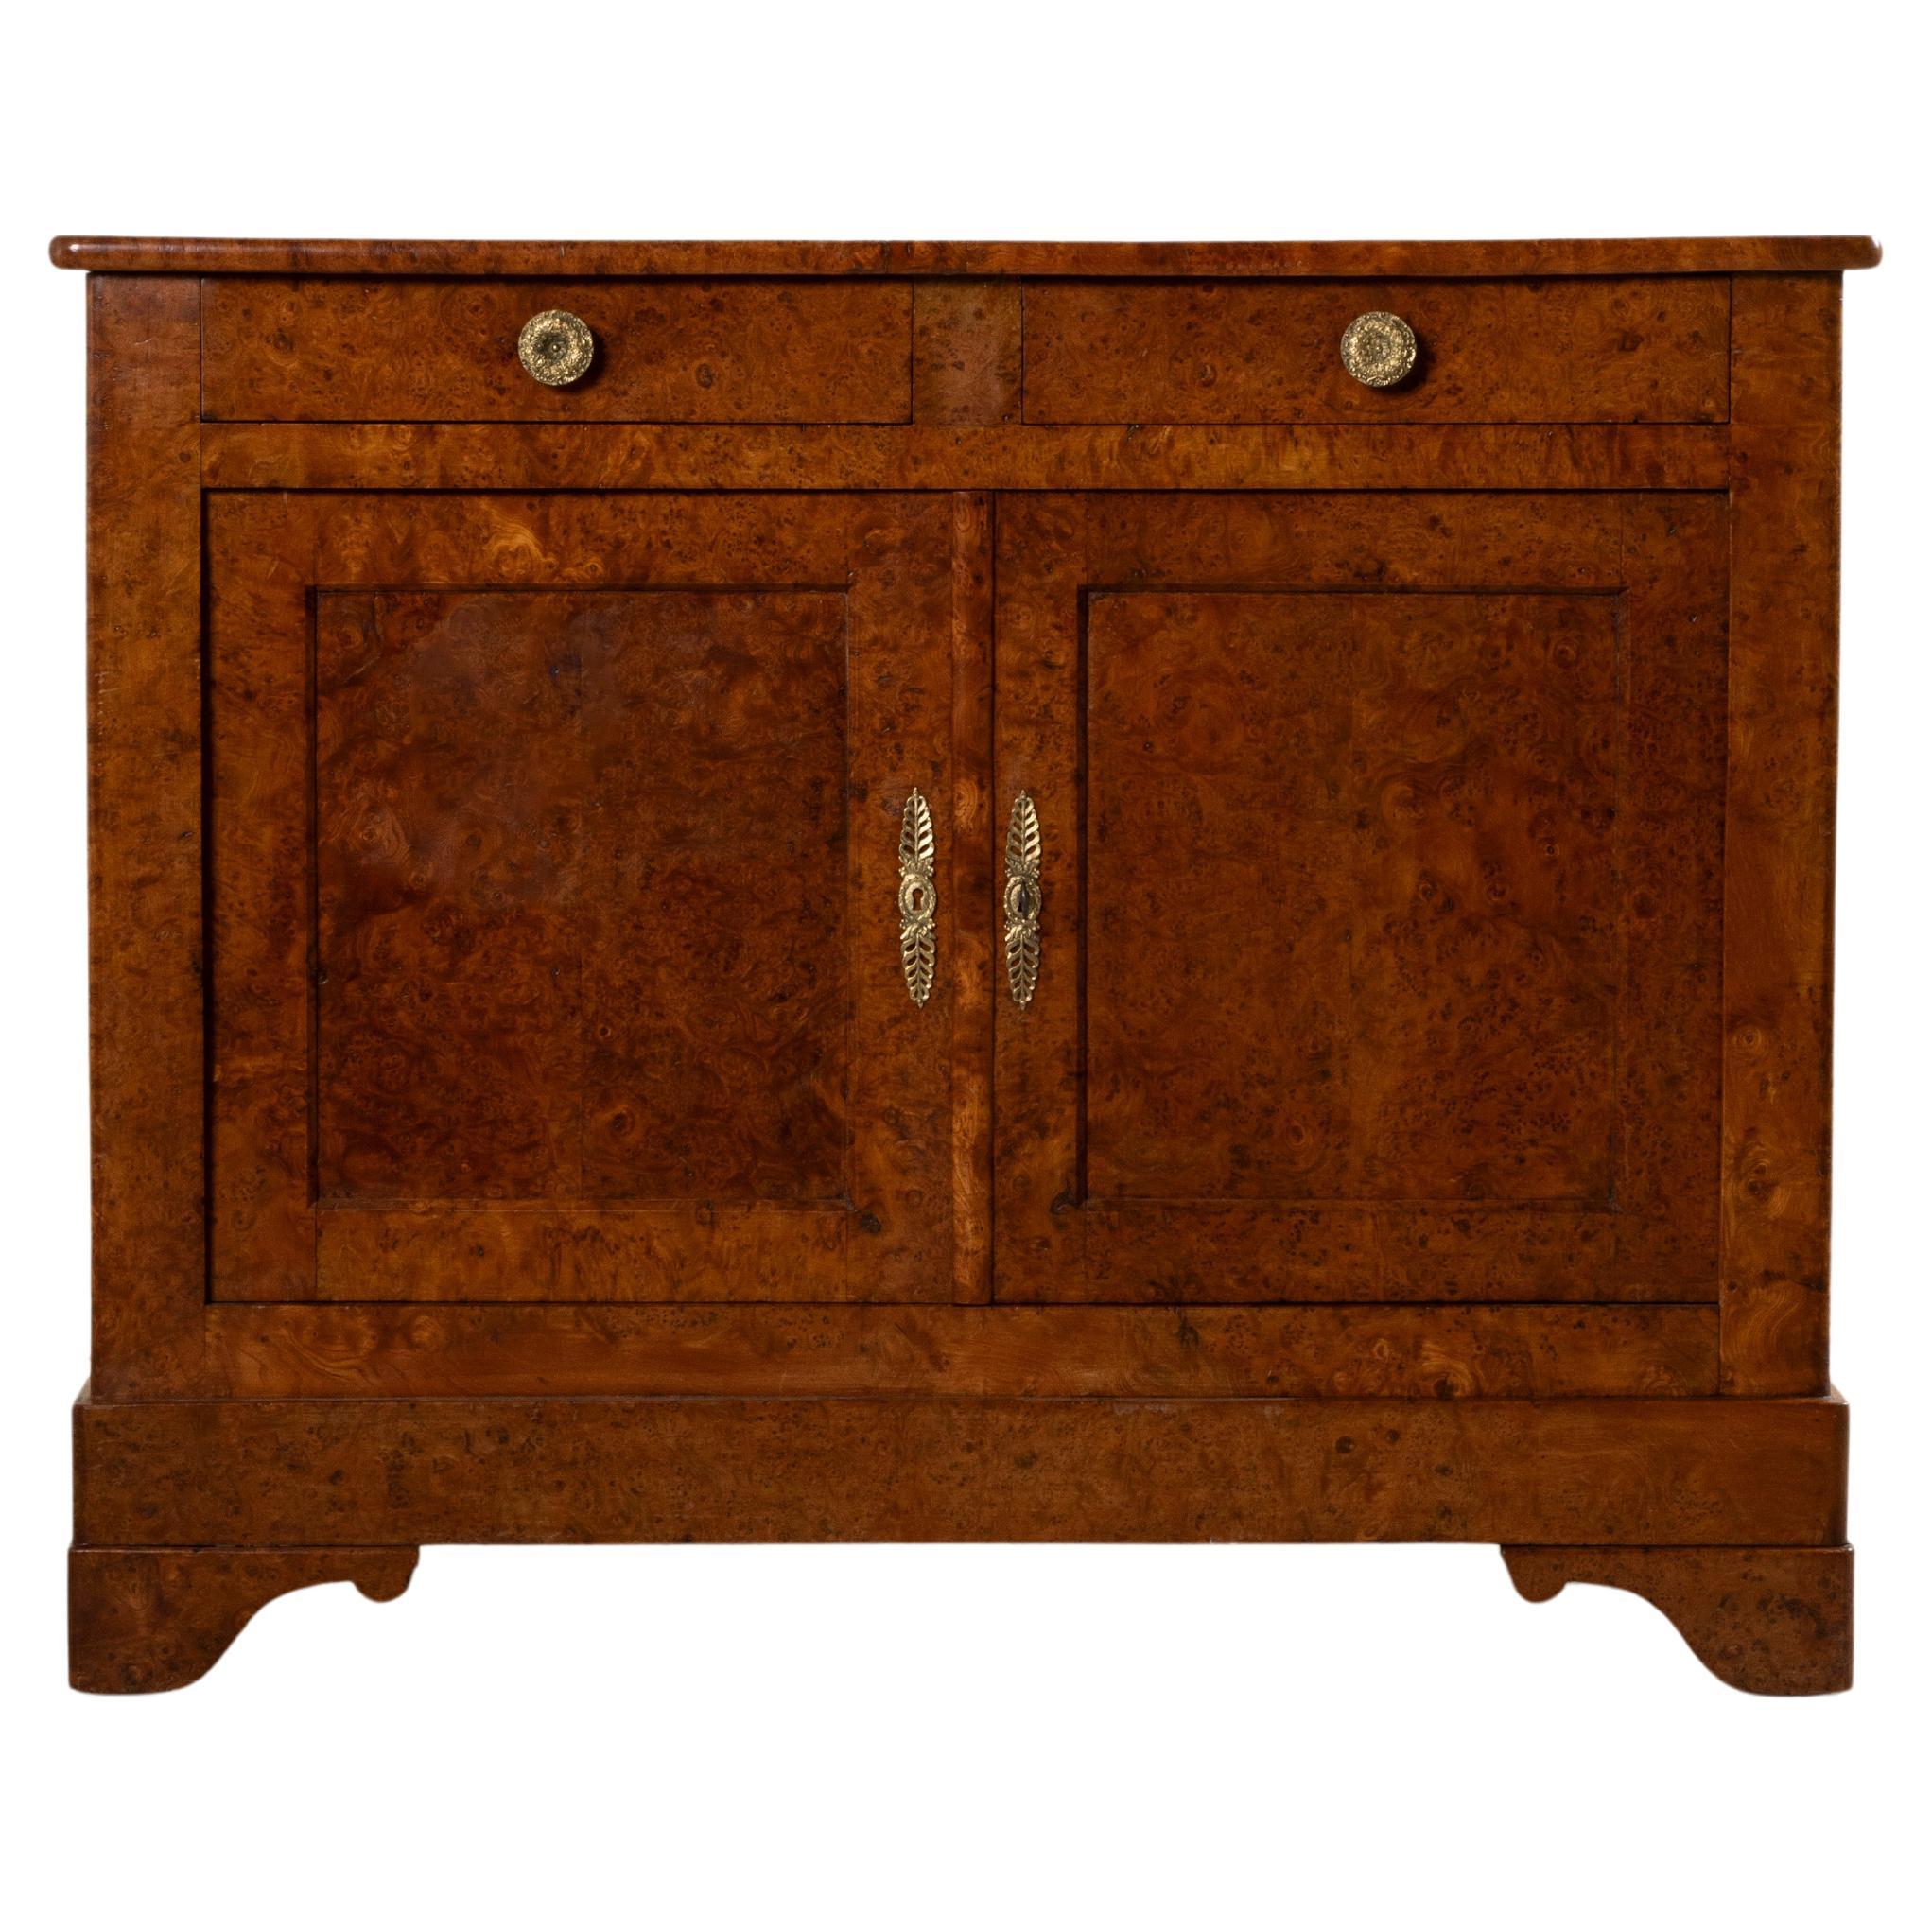 Mid-19th Century French Louis Philippe Period Burl Elm Buffet or Sideboard